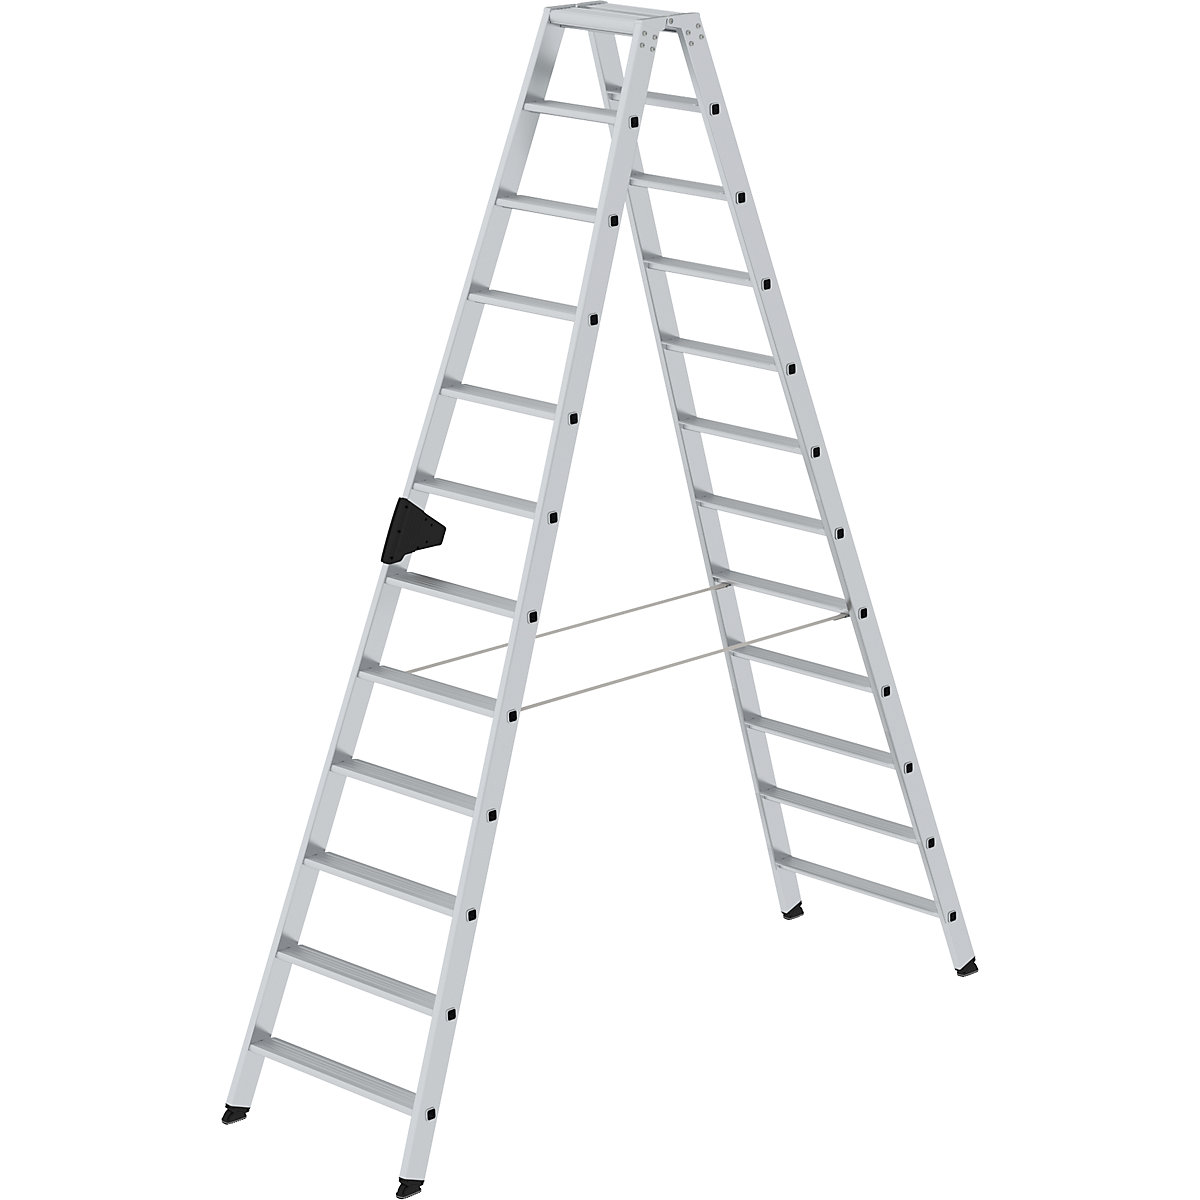 Step ladder, double sided – MUNK, comfort model with ergo pad®, 2 x 12 steps-11